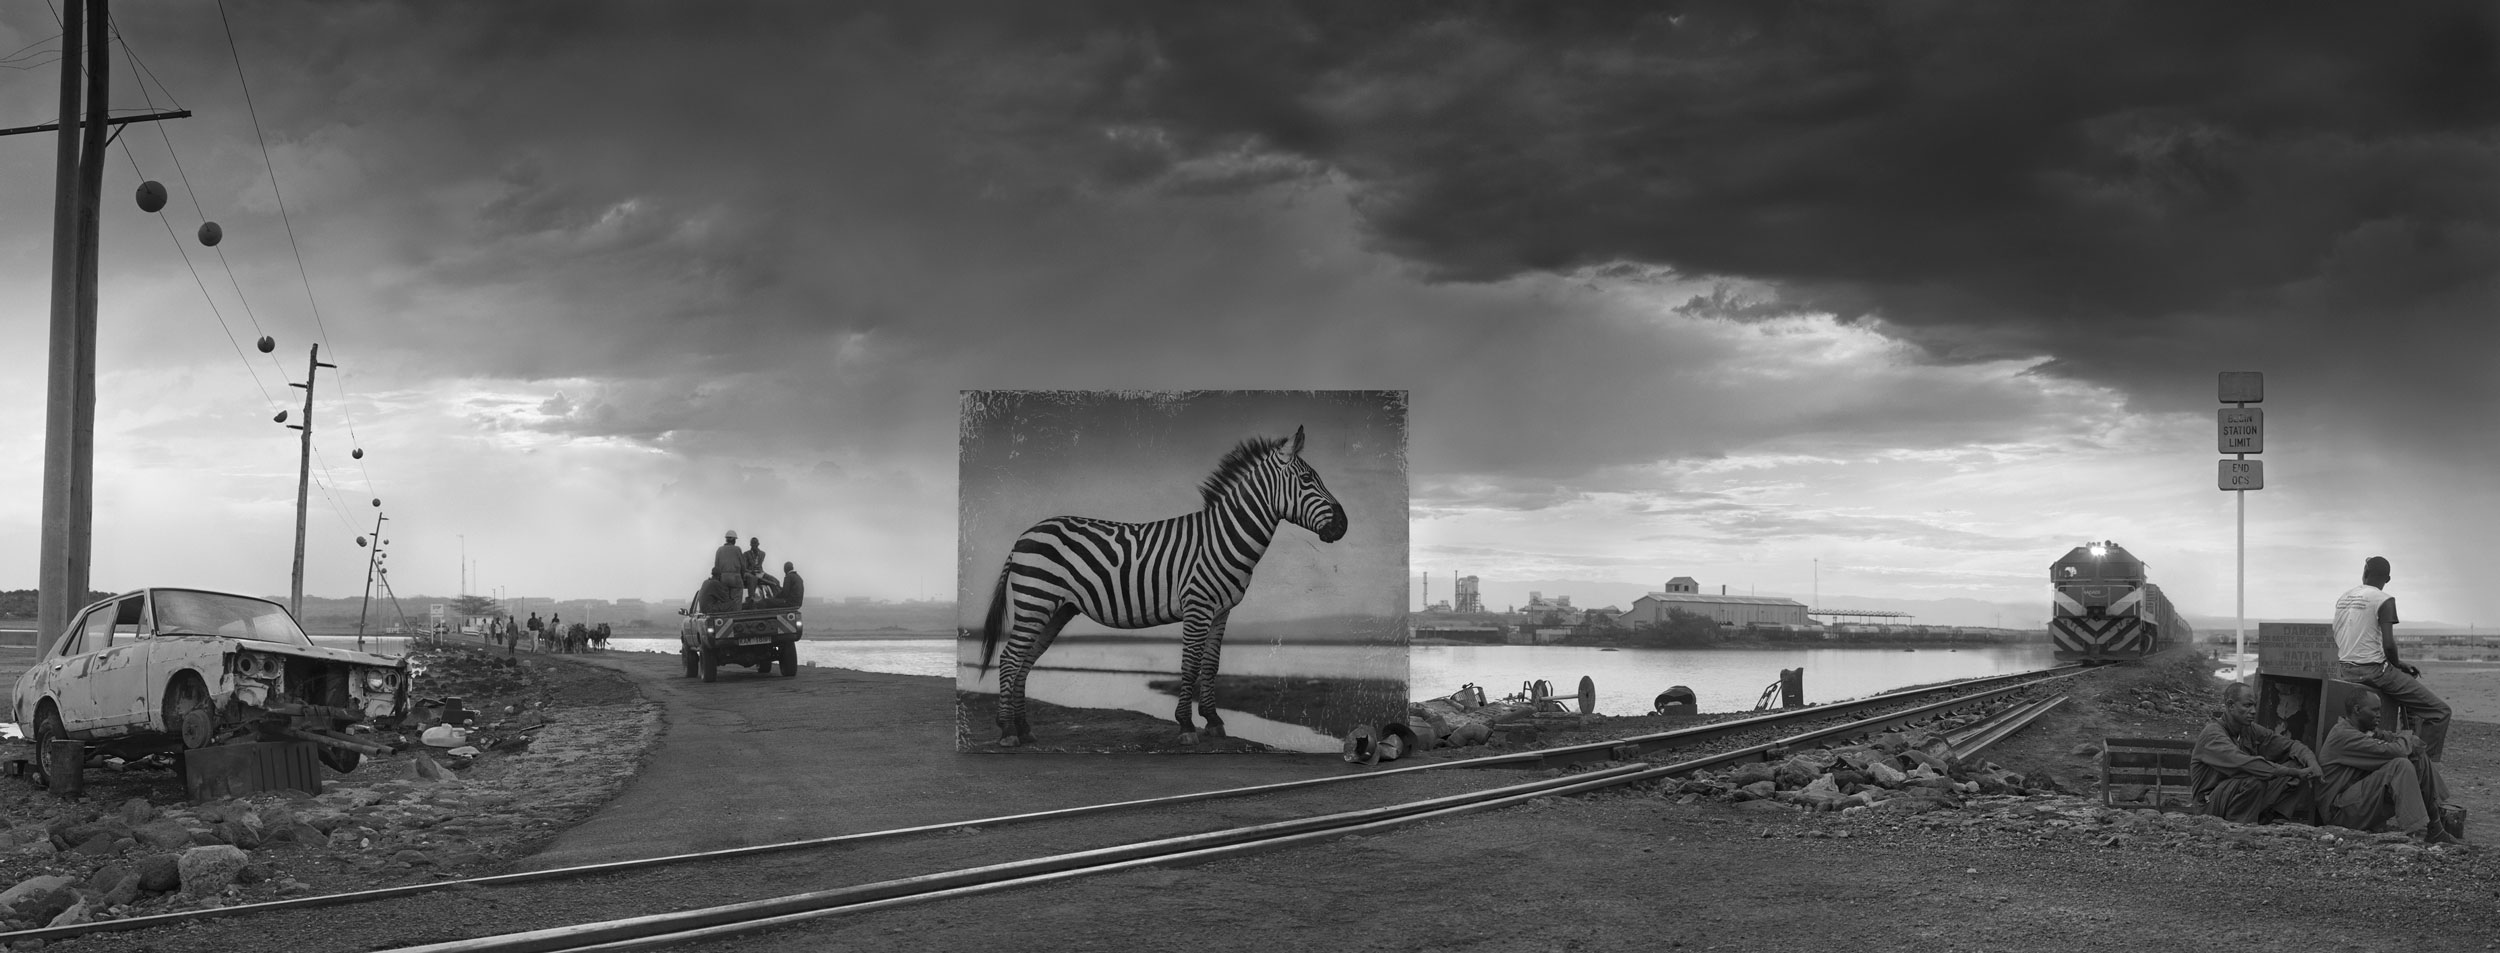 ROAD-TO-FACTORY-WITH-ZEBRA